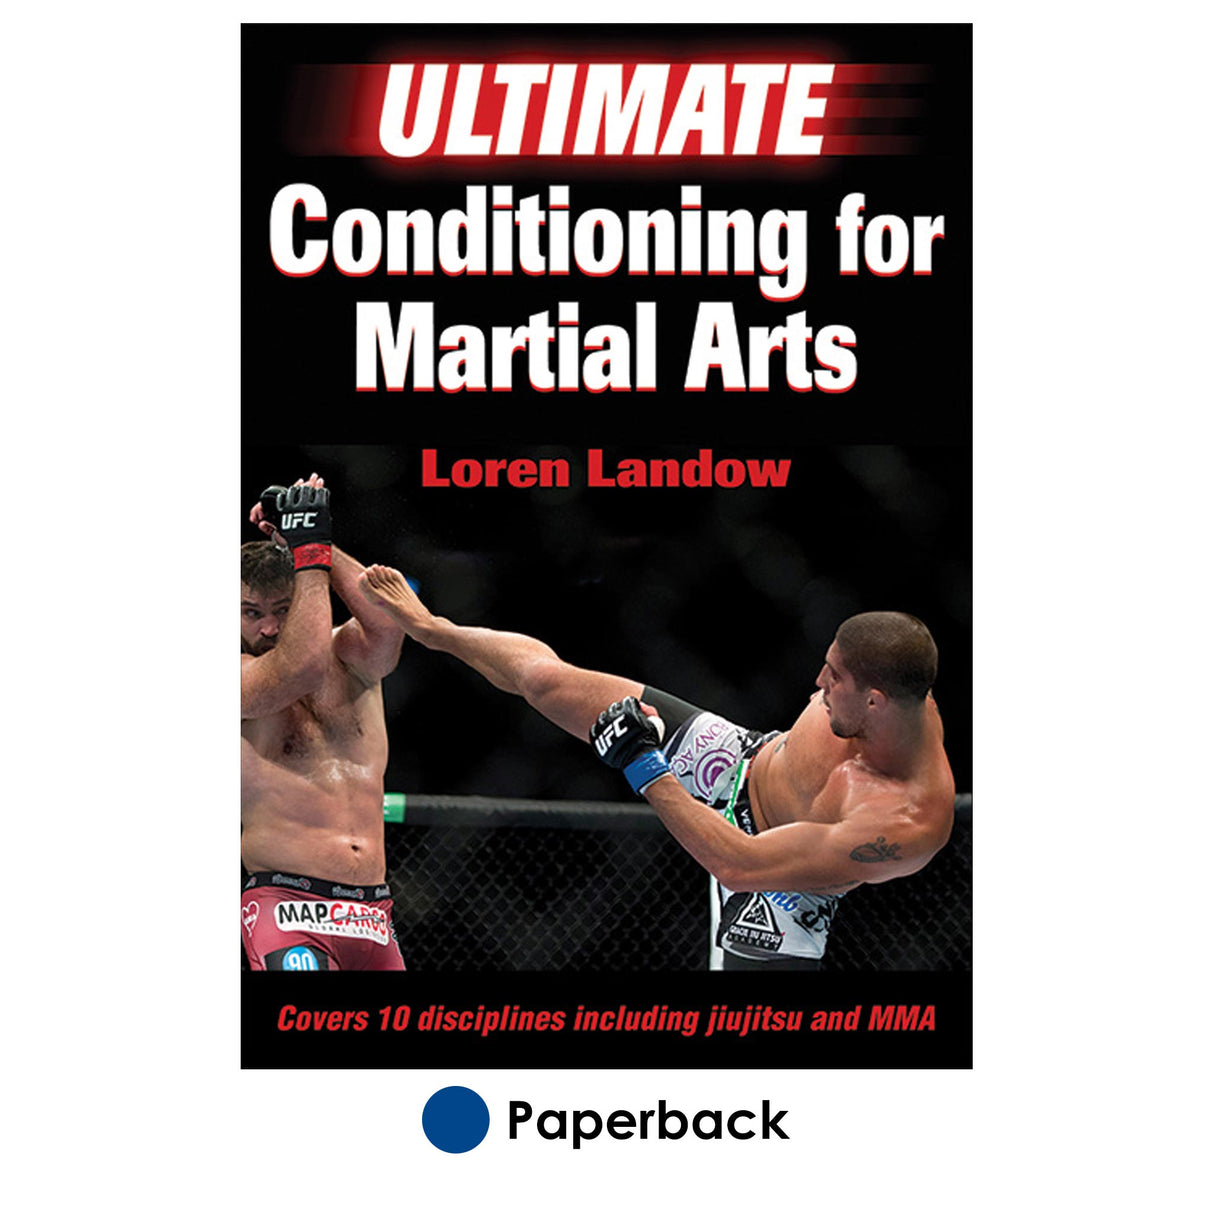 Ultimate Conditioning for Martial Arts